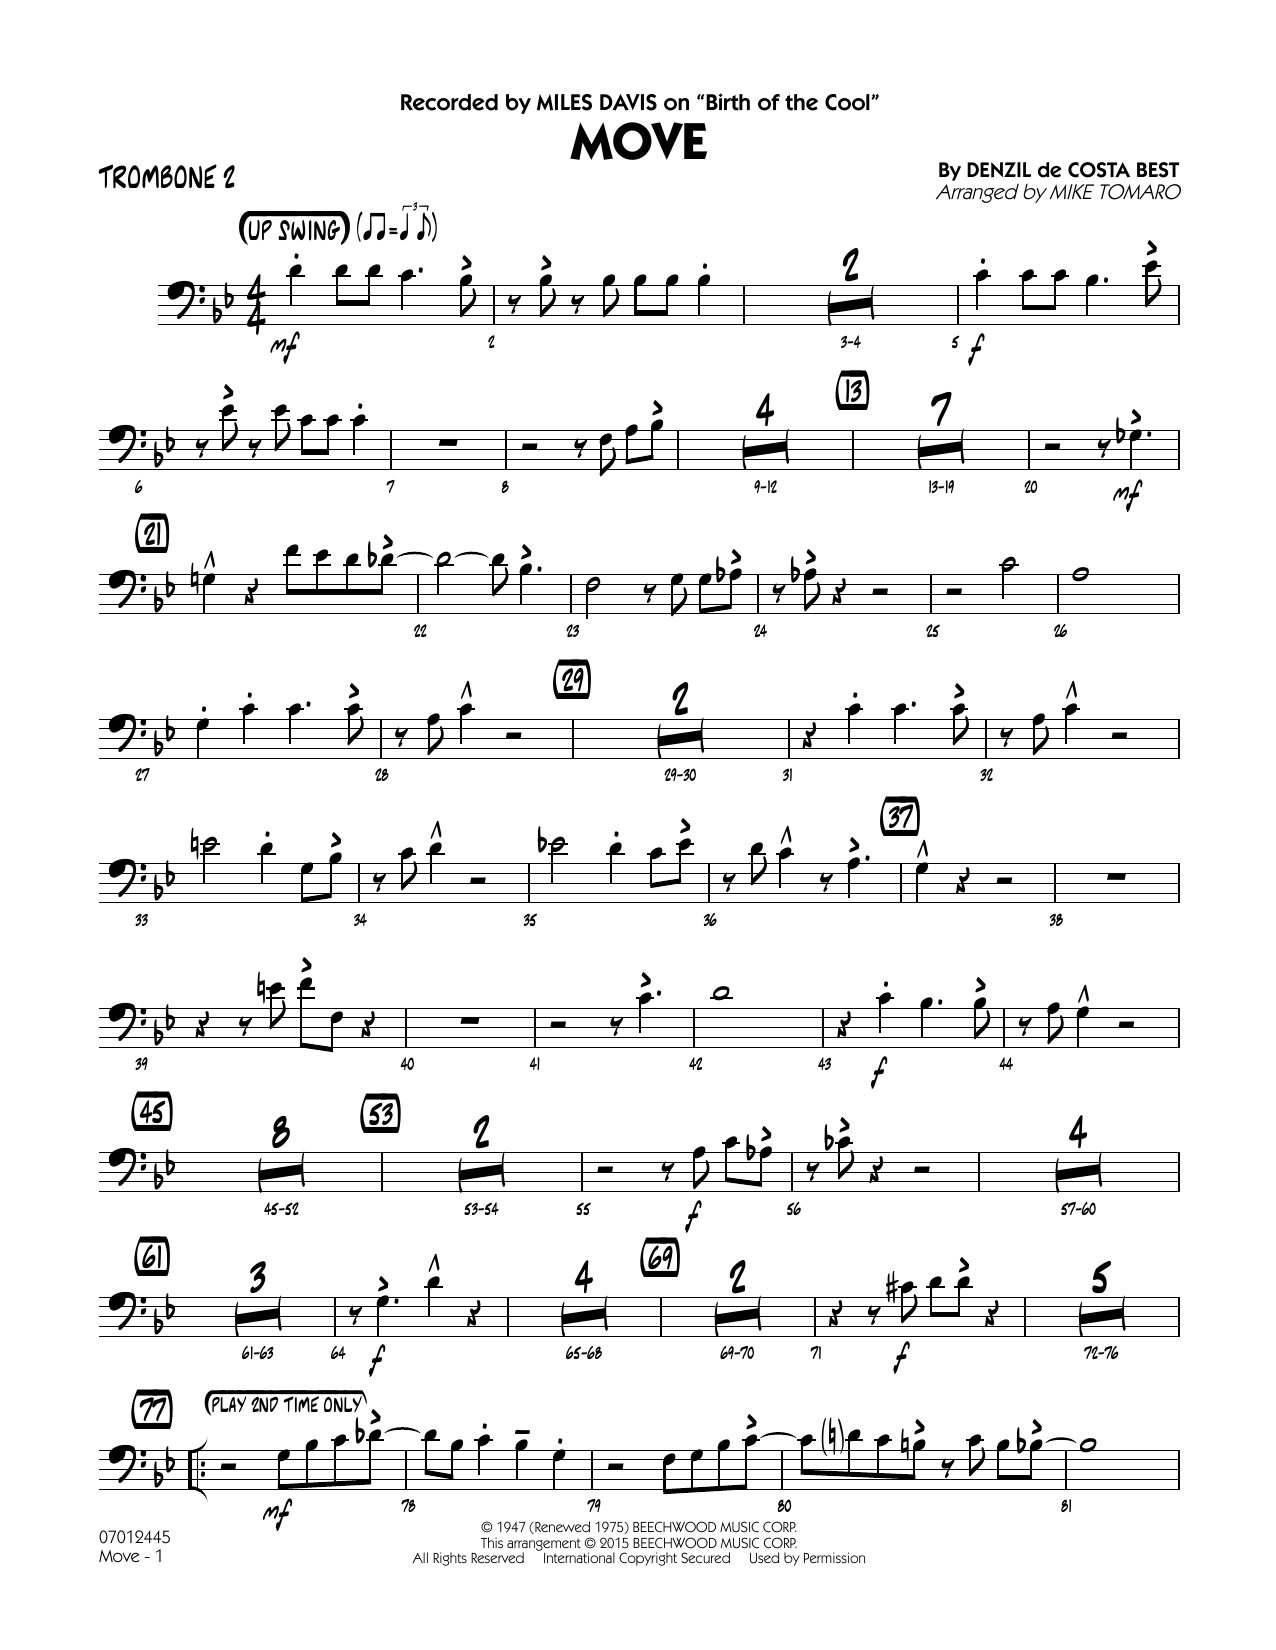 Mike Tomaro Move - Trombone 2 sheet music notes and chords. Download Printable PDF.